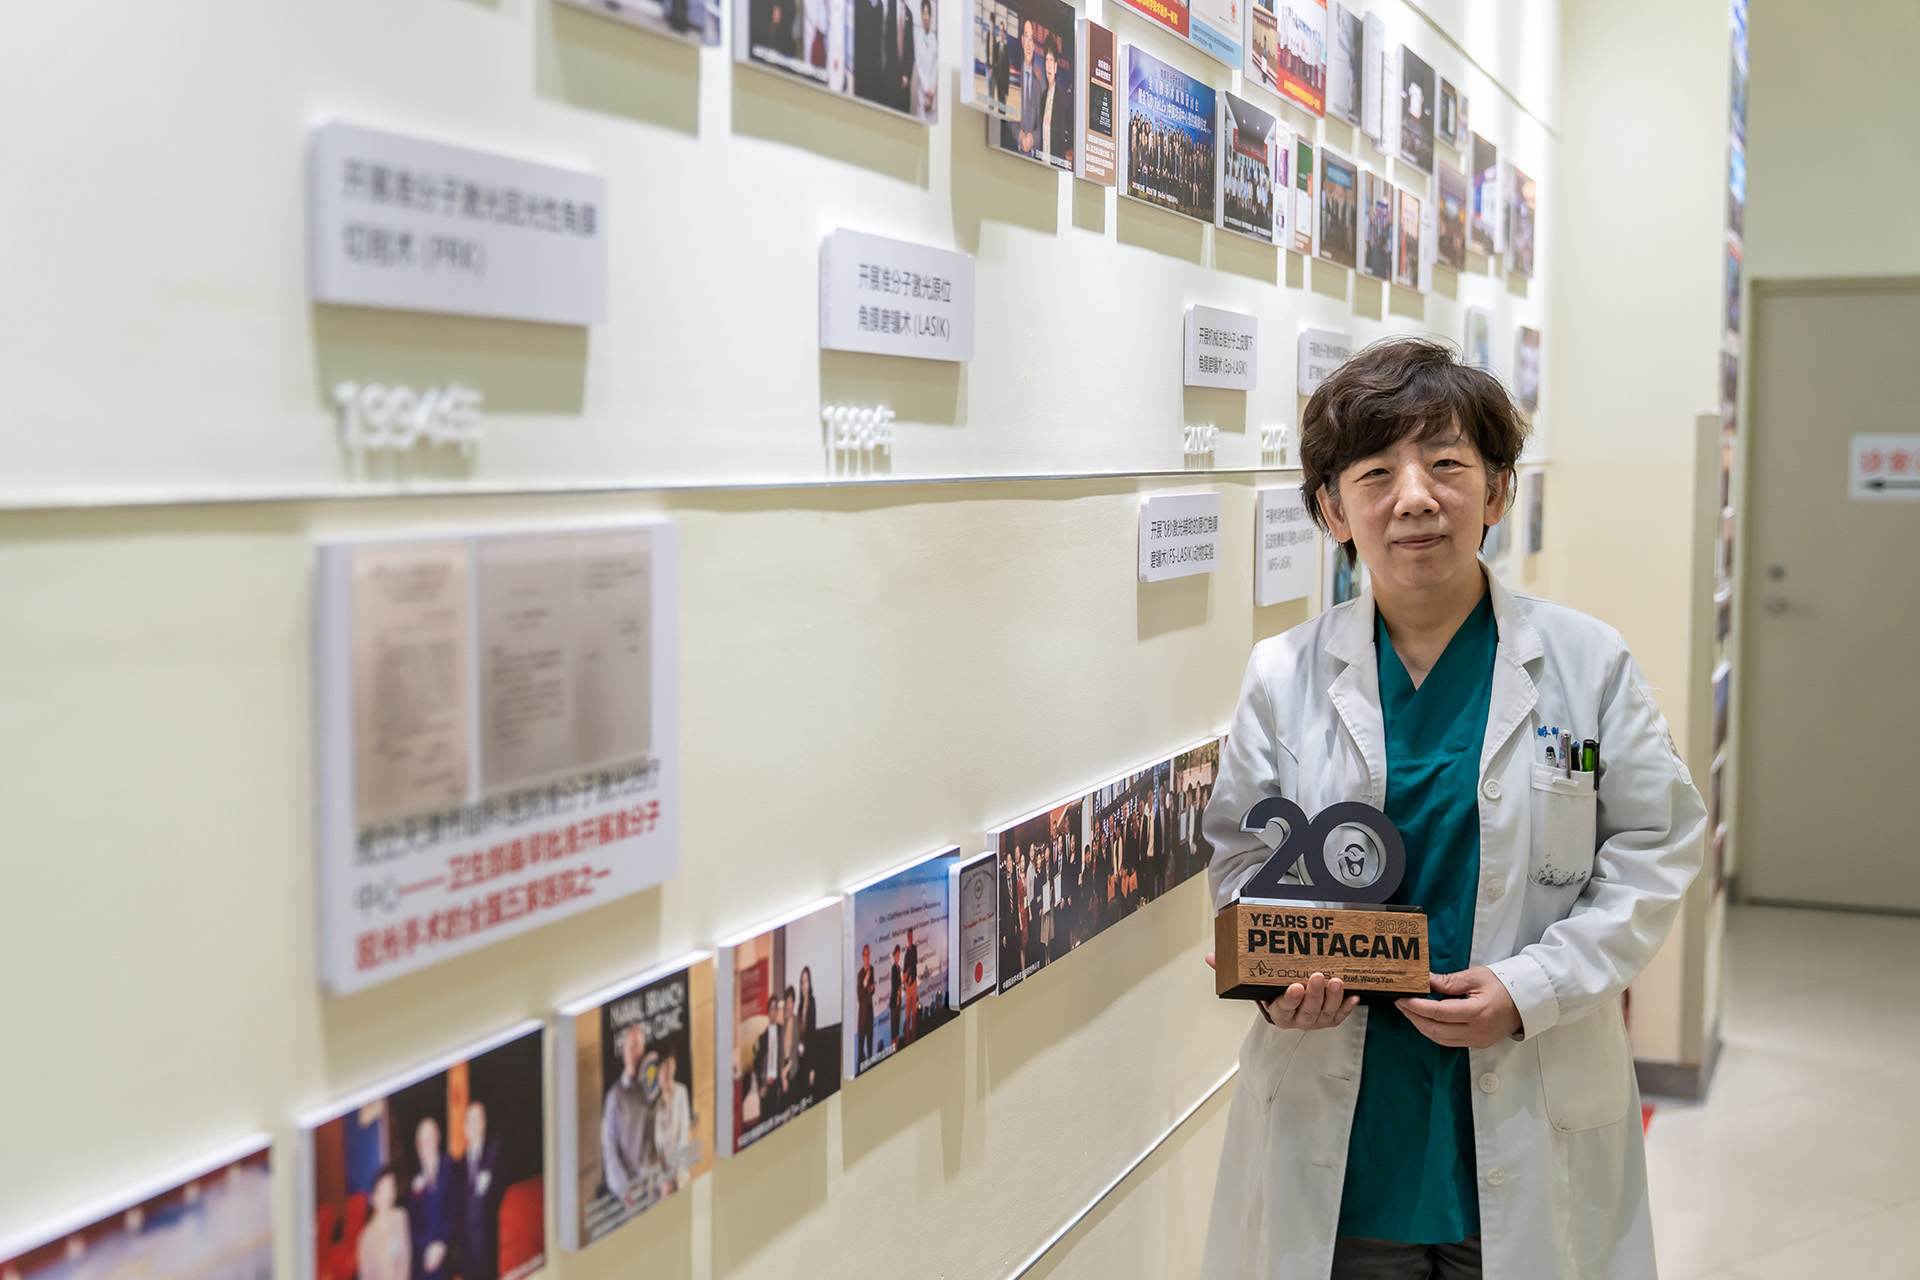 Prof Wang Yan holds her Pentacam® 20th anniversary trophy, and the back wall shows the development of her refractive surgery laboratory for more than 20 years